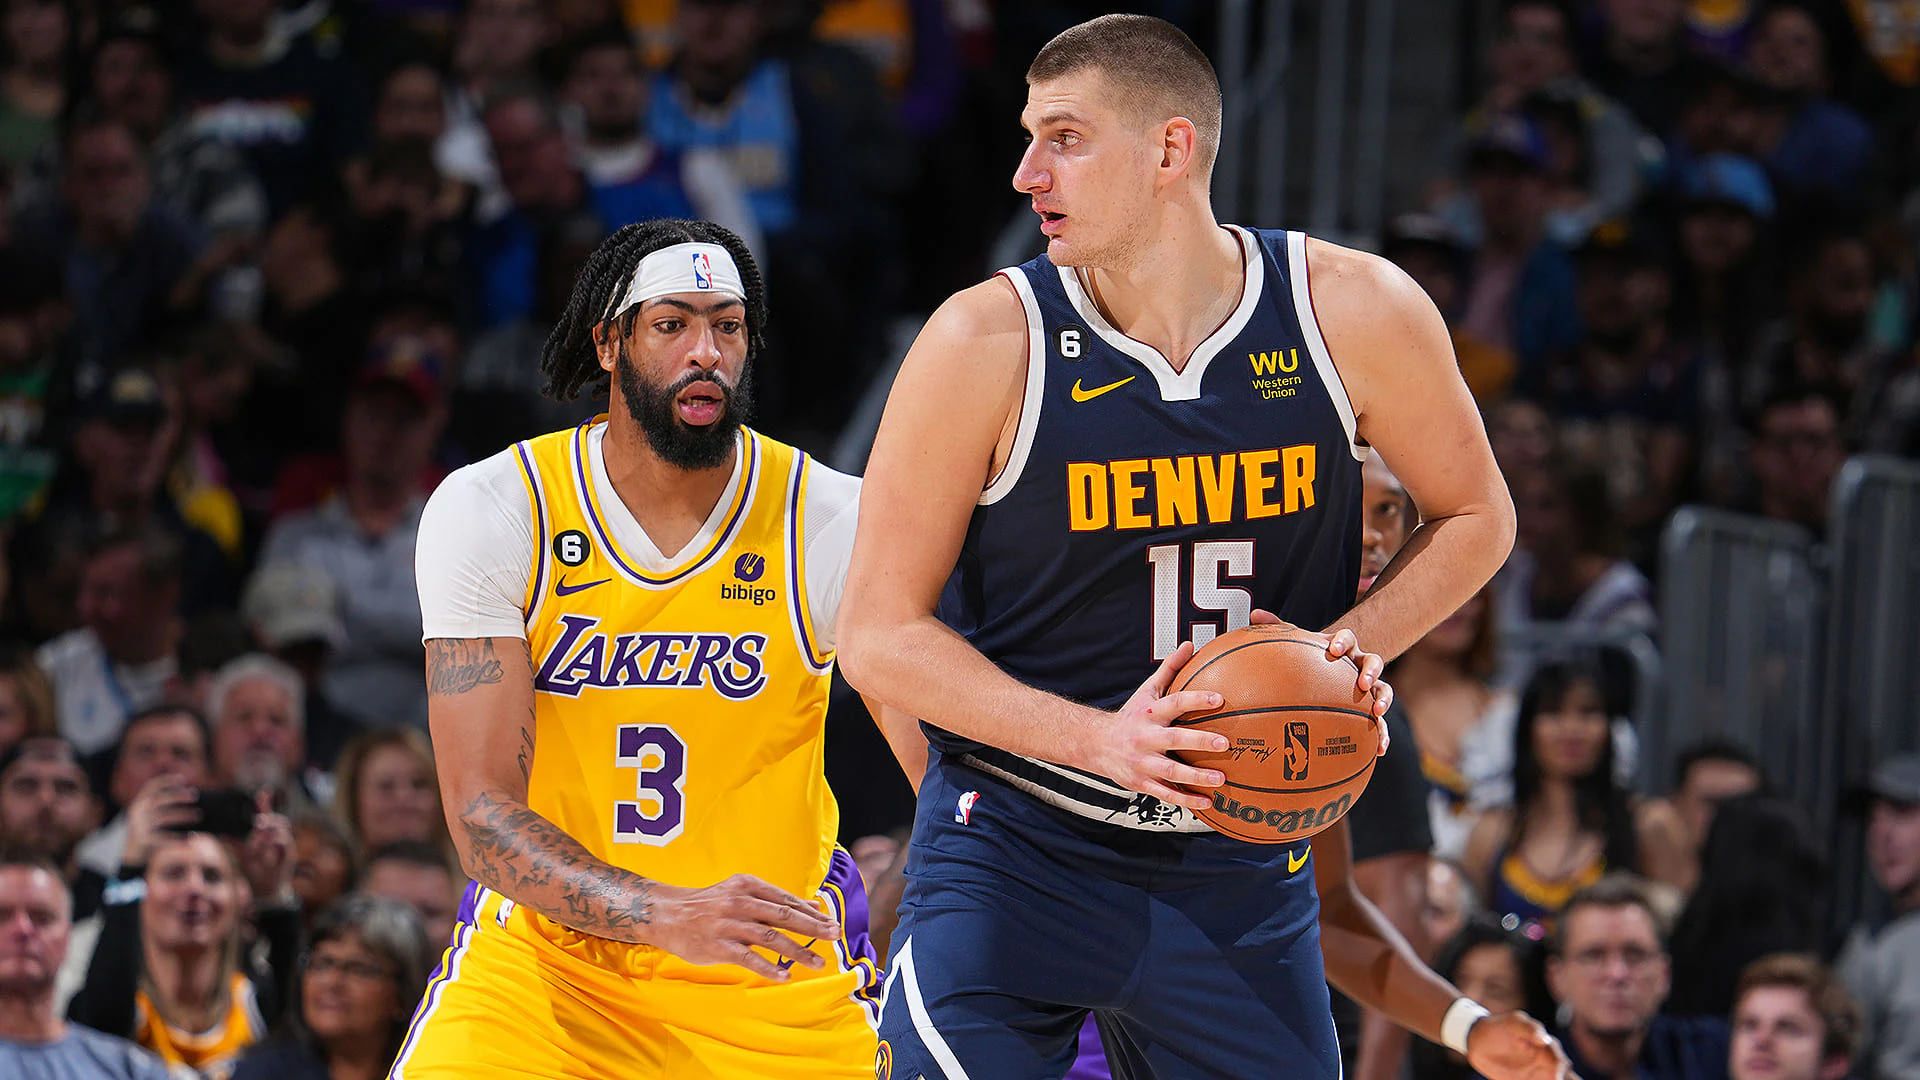 Denver Nuggets vs. LA Lakers: Preview, Where to Watch and Betting Odds